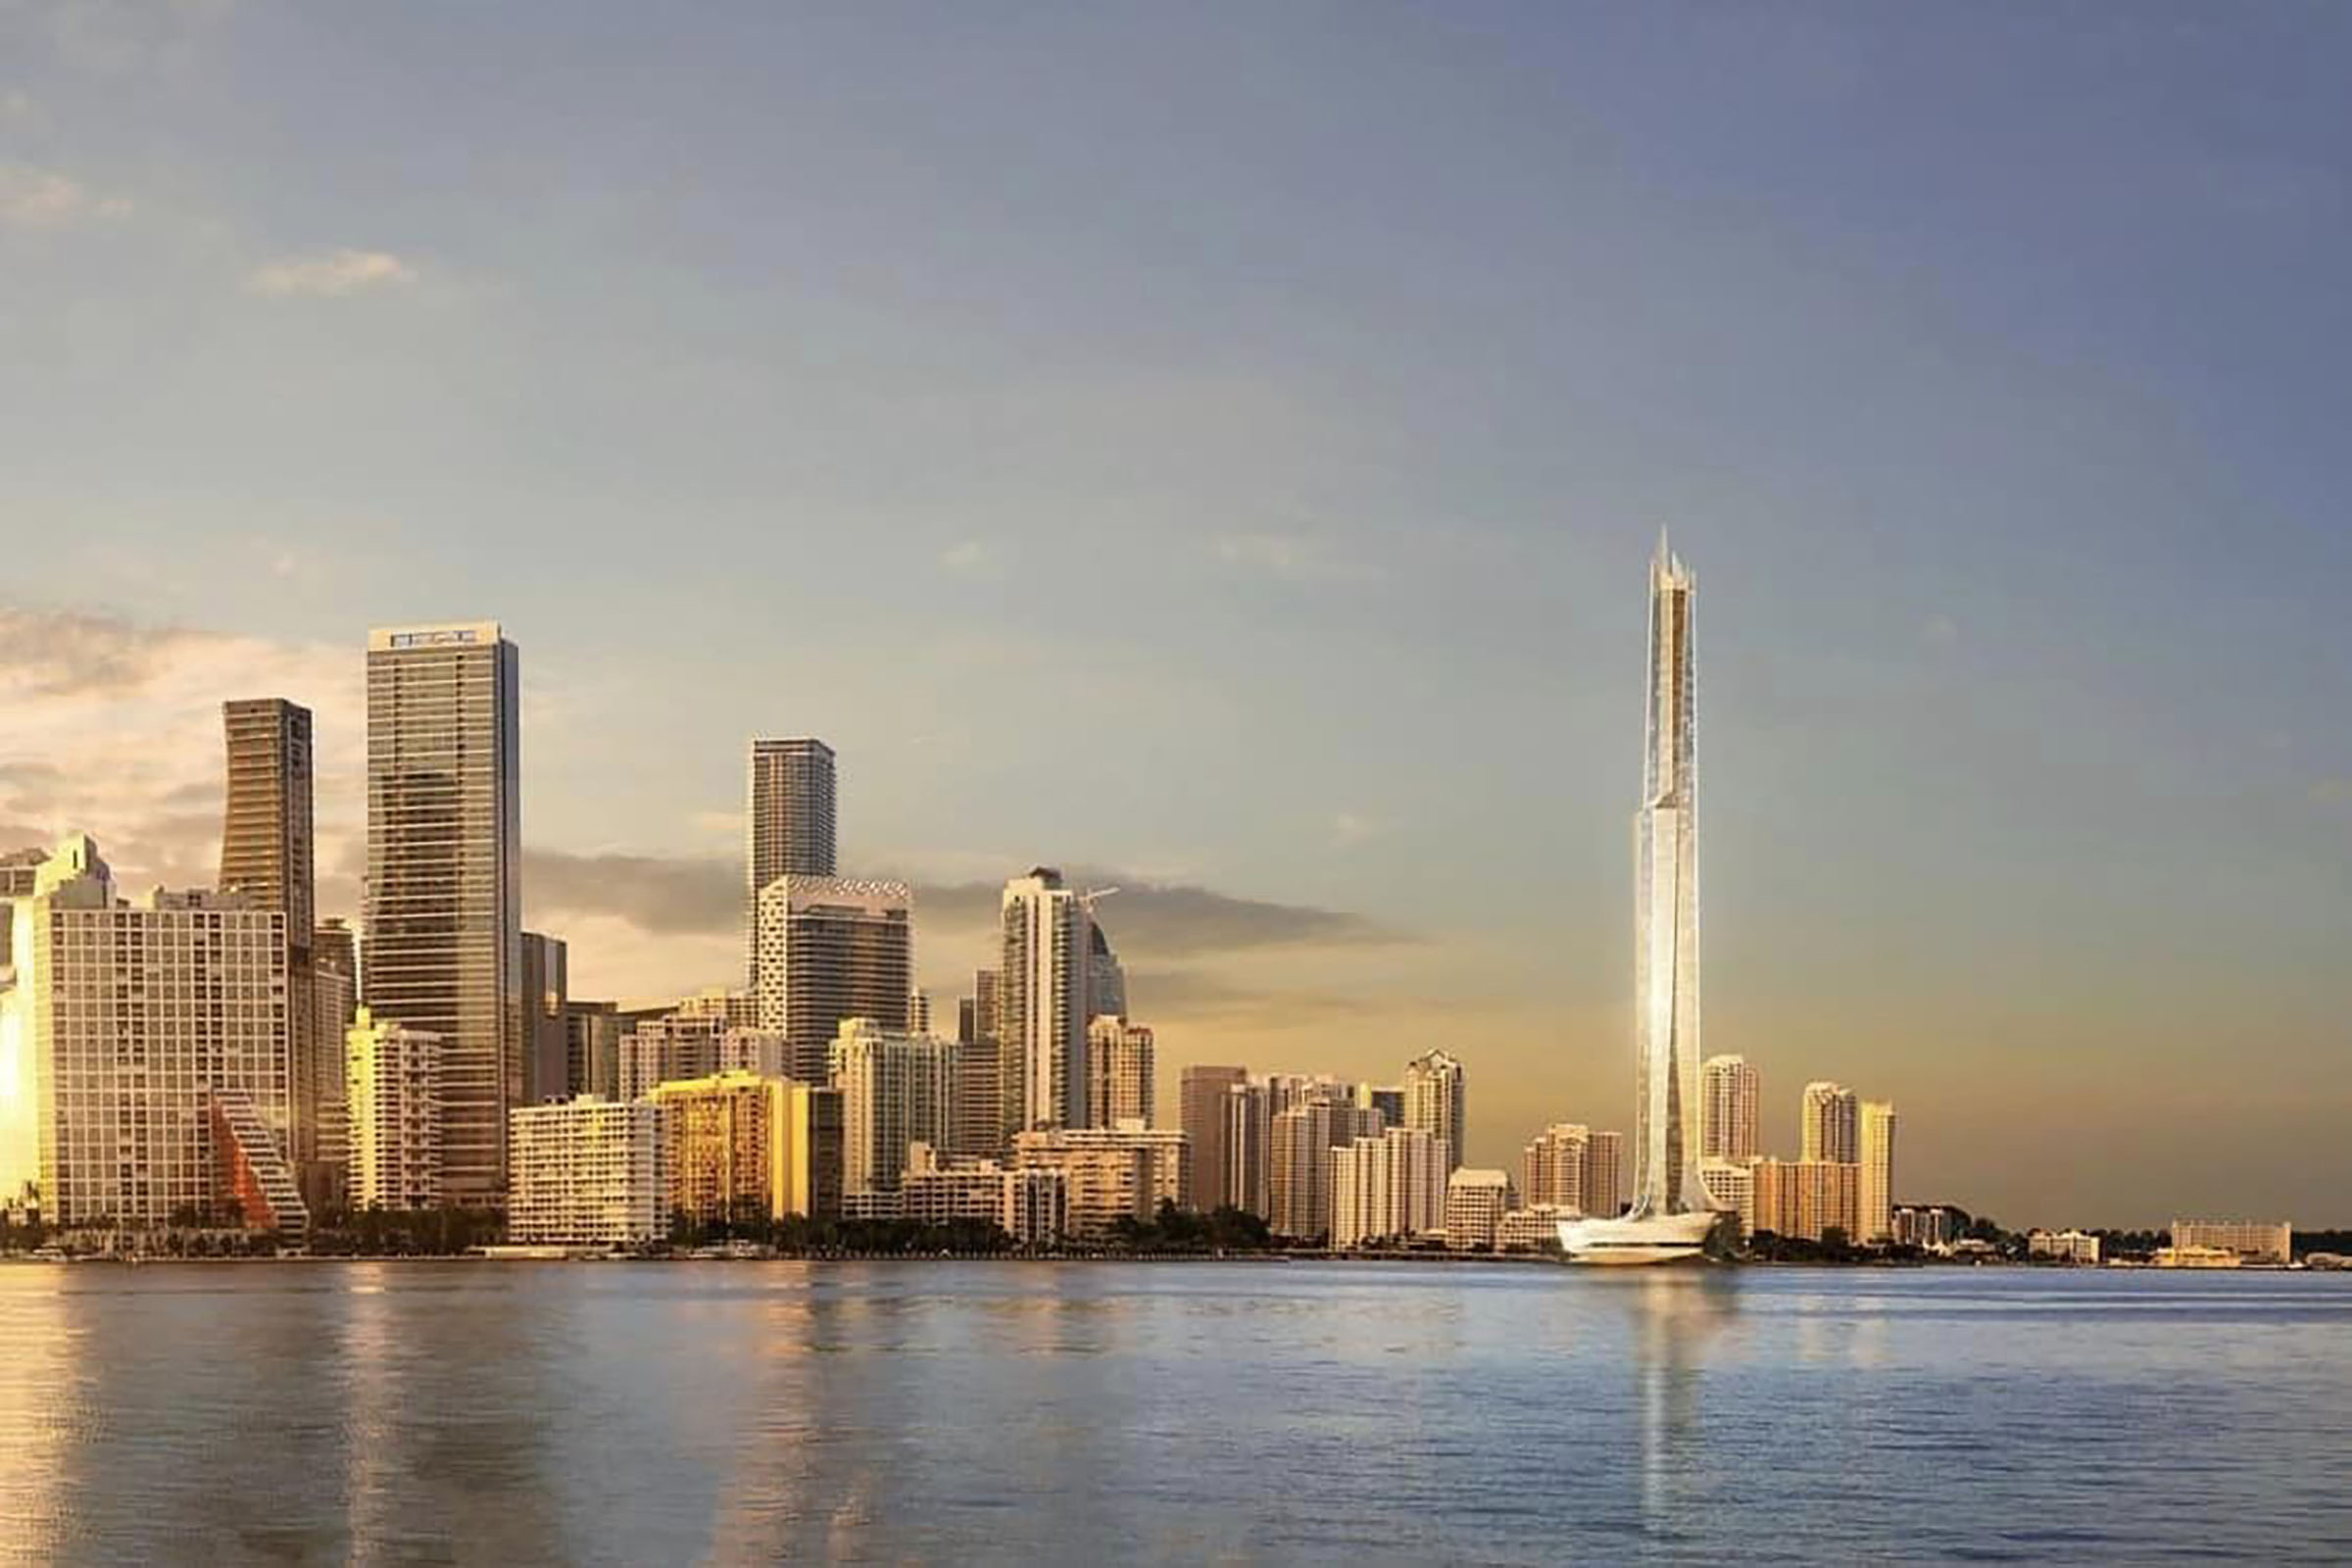 Is This The Brickell Key Supertall Tower That Swire Will Build Over Brickell Key Park?